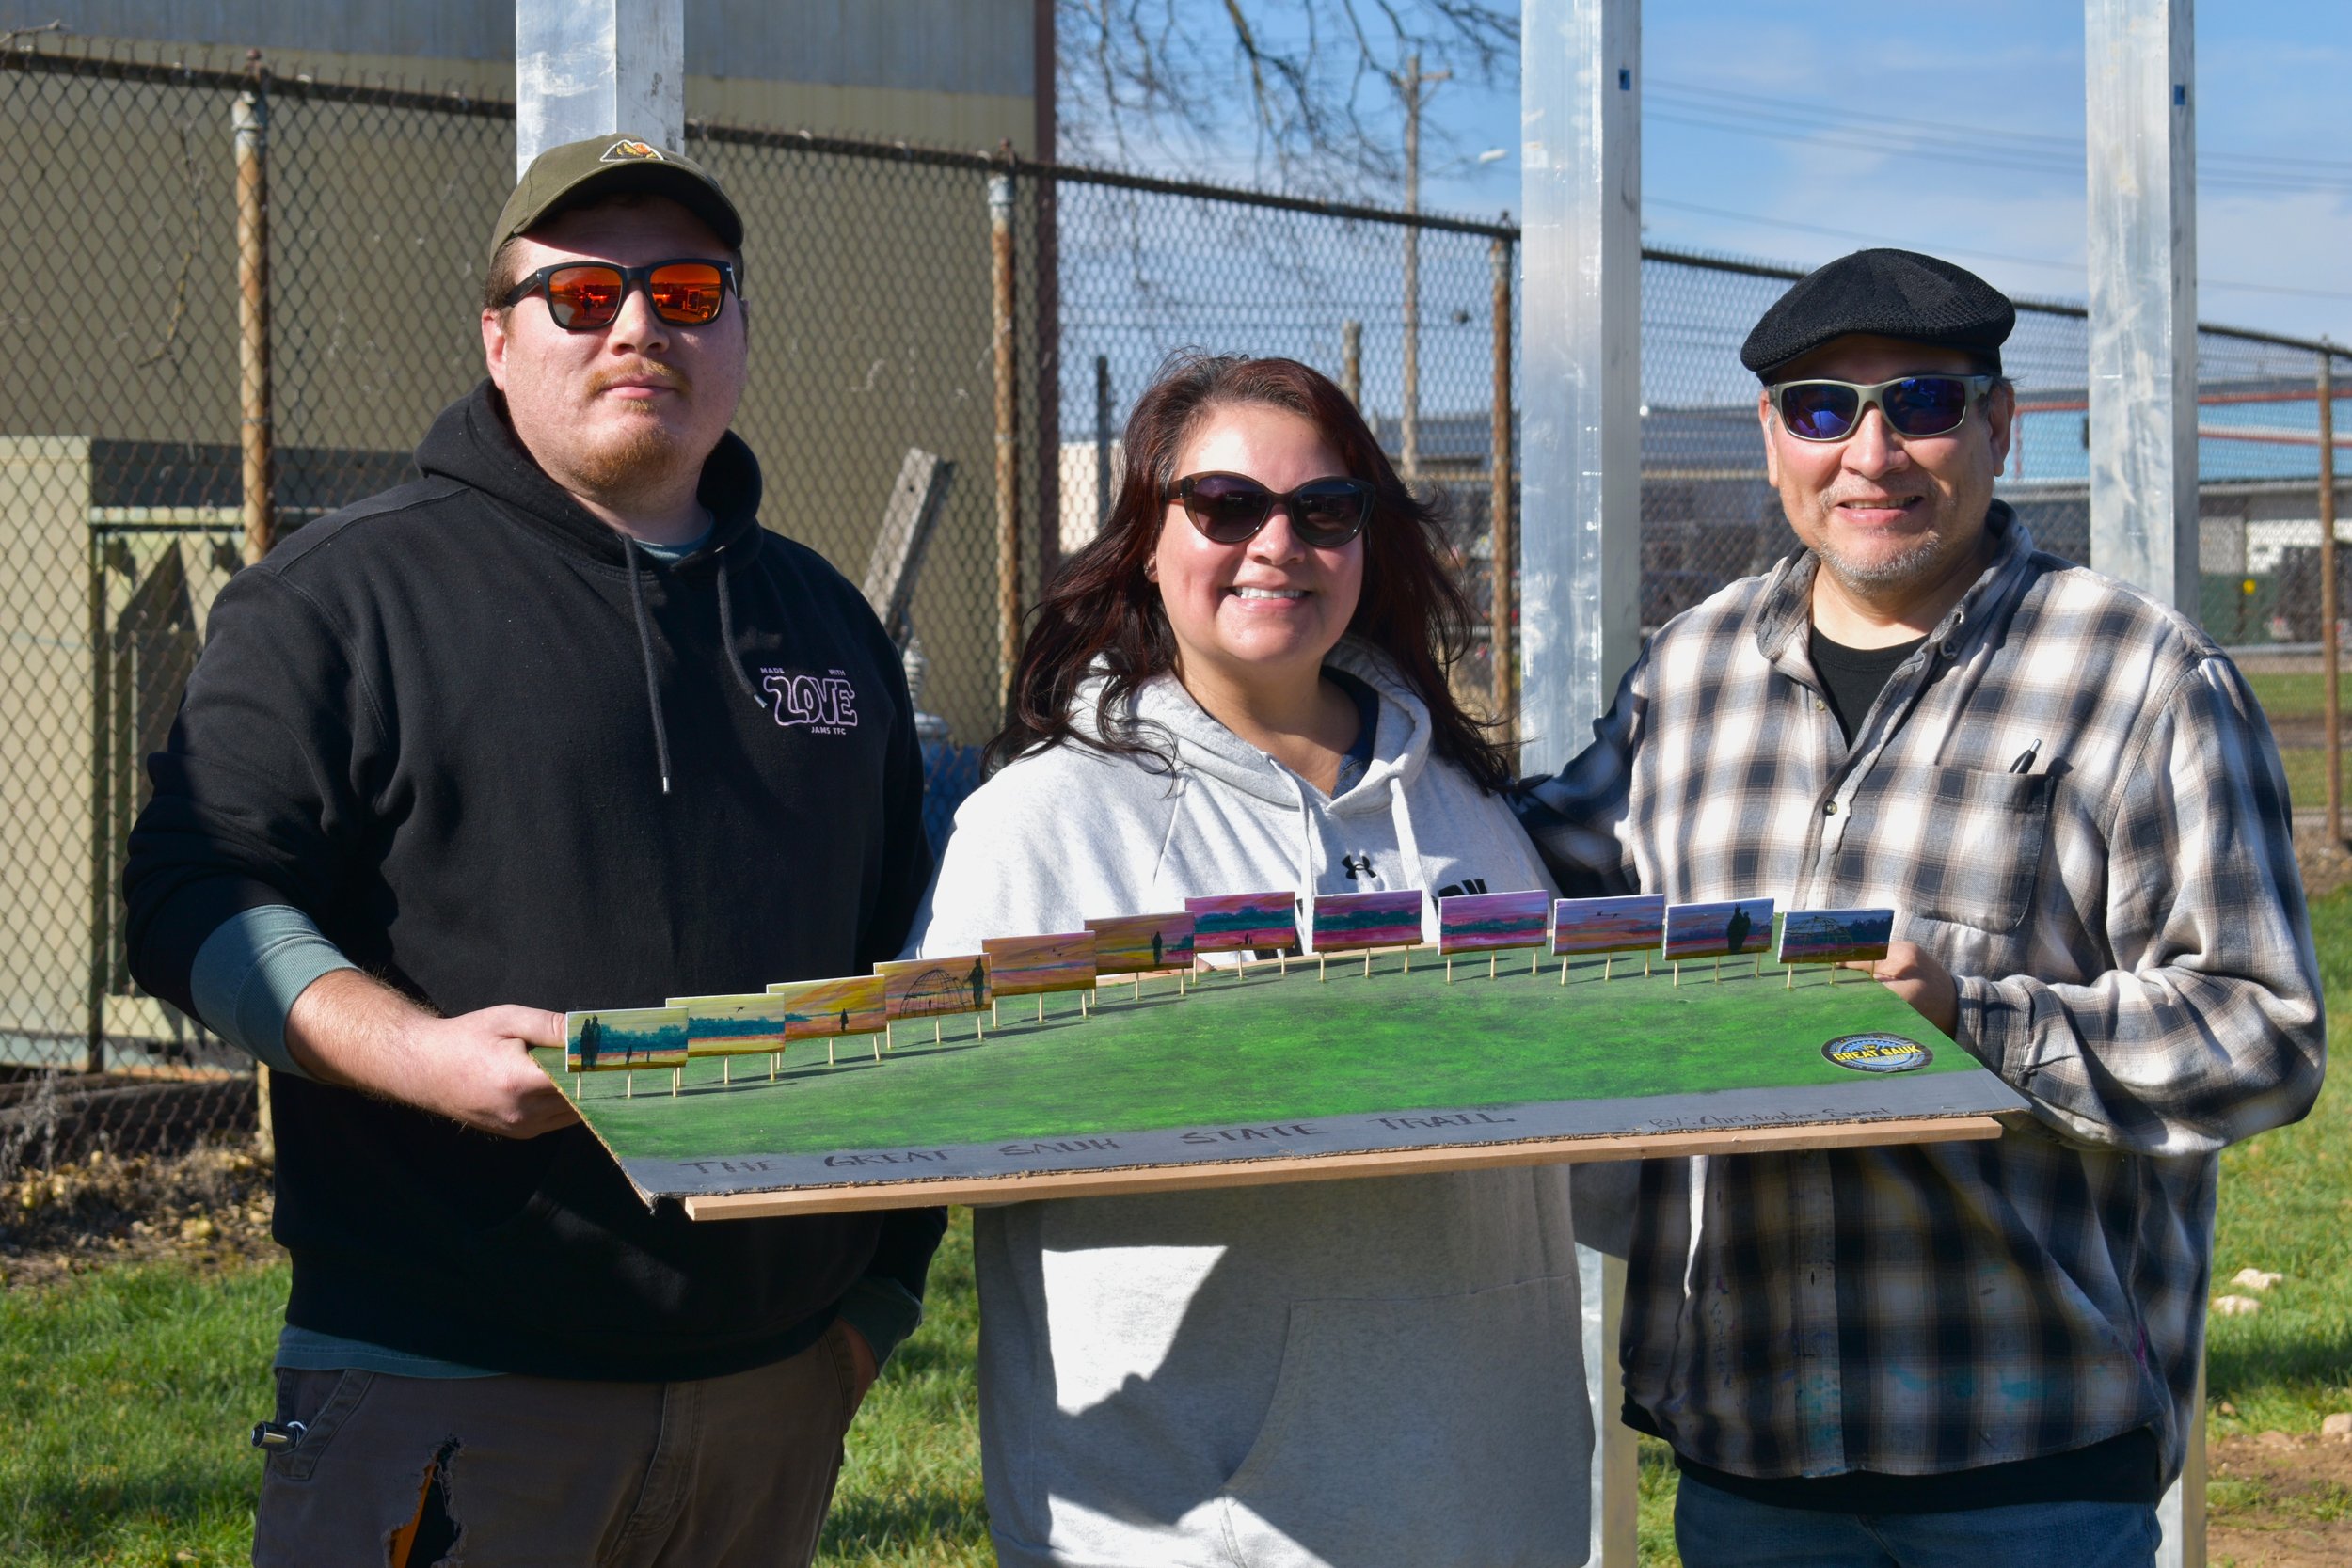  l to r- Austin, Chrissy, and Chris, holding up the scale model of the proposed mural. 